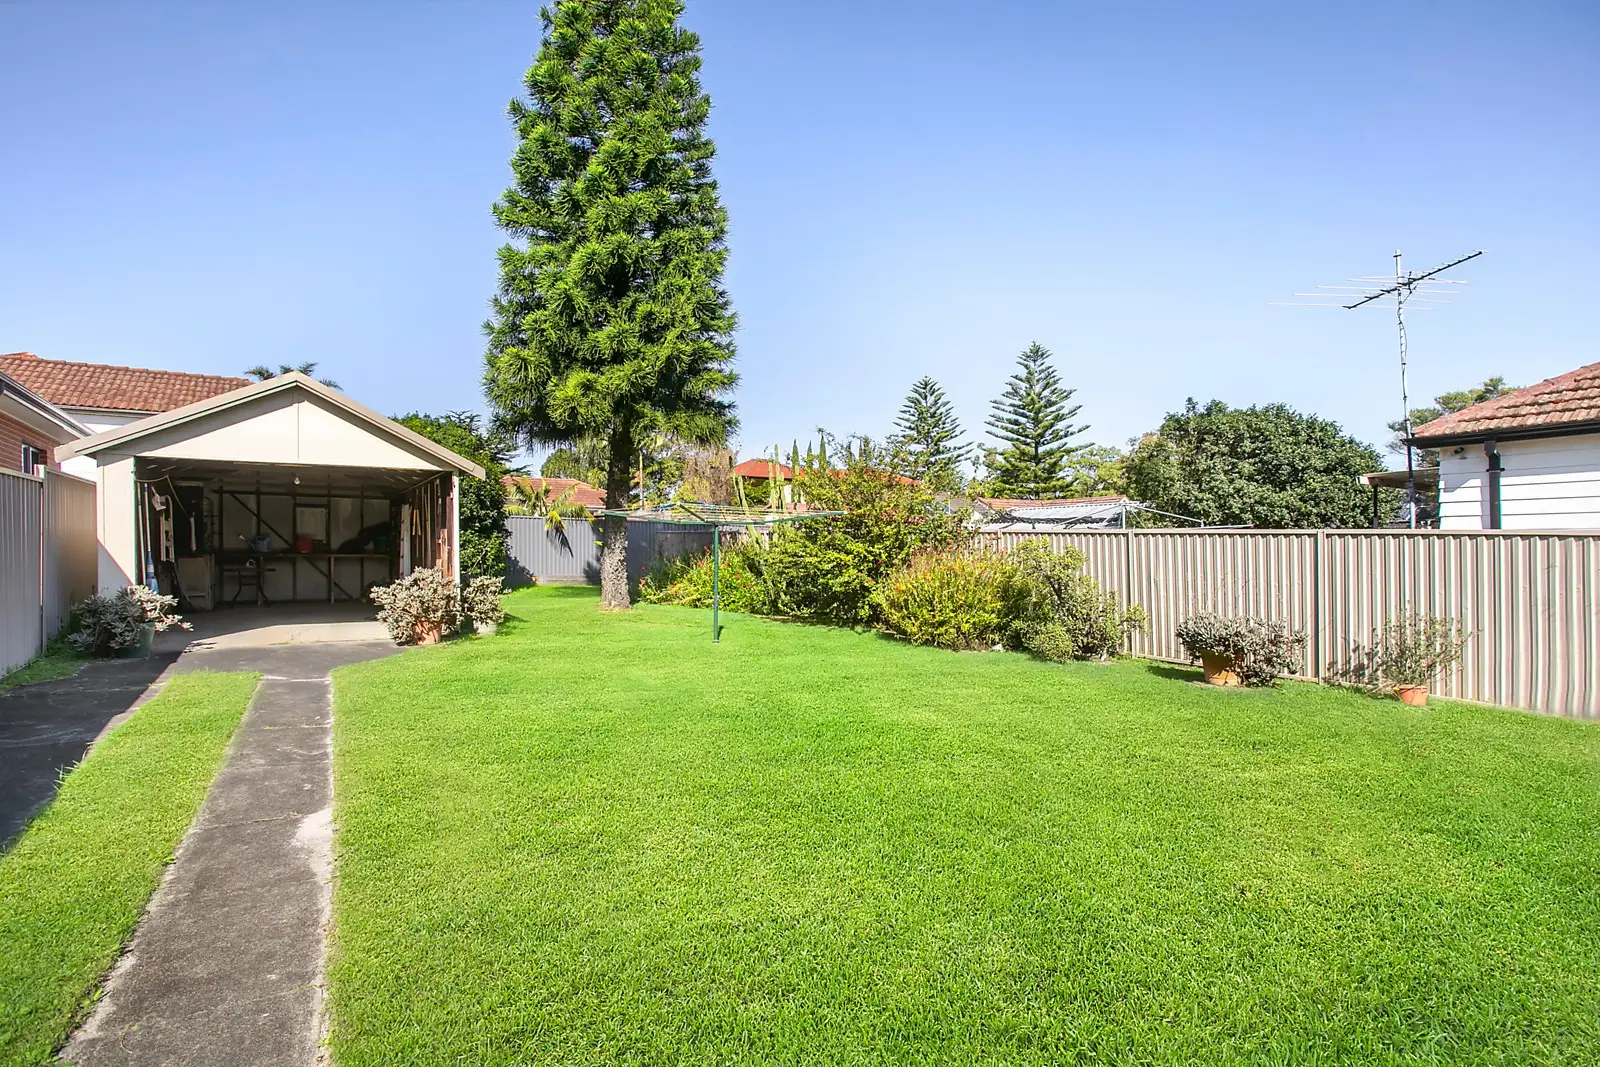 Photo #1: 80 Page Street, Pagewood - Sold by Sydney Sotheby's International Realty